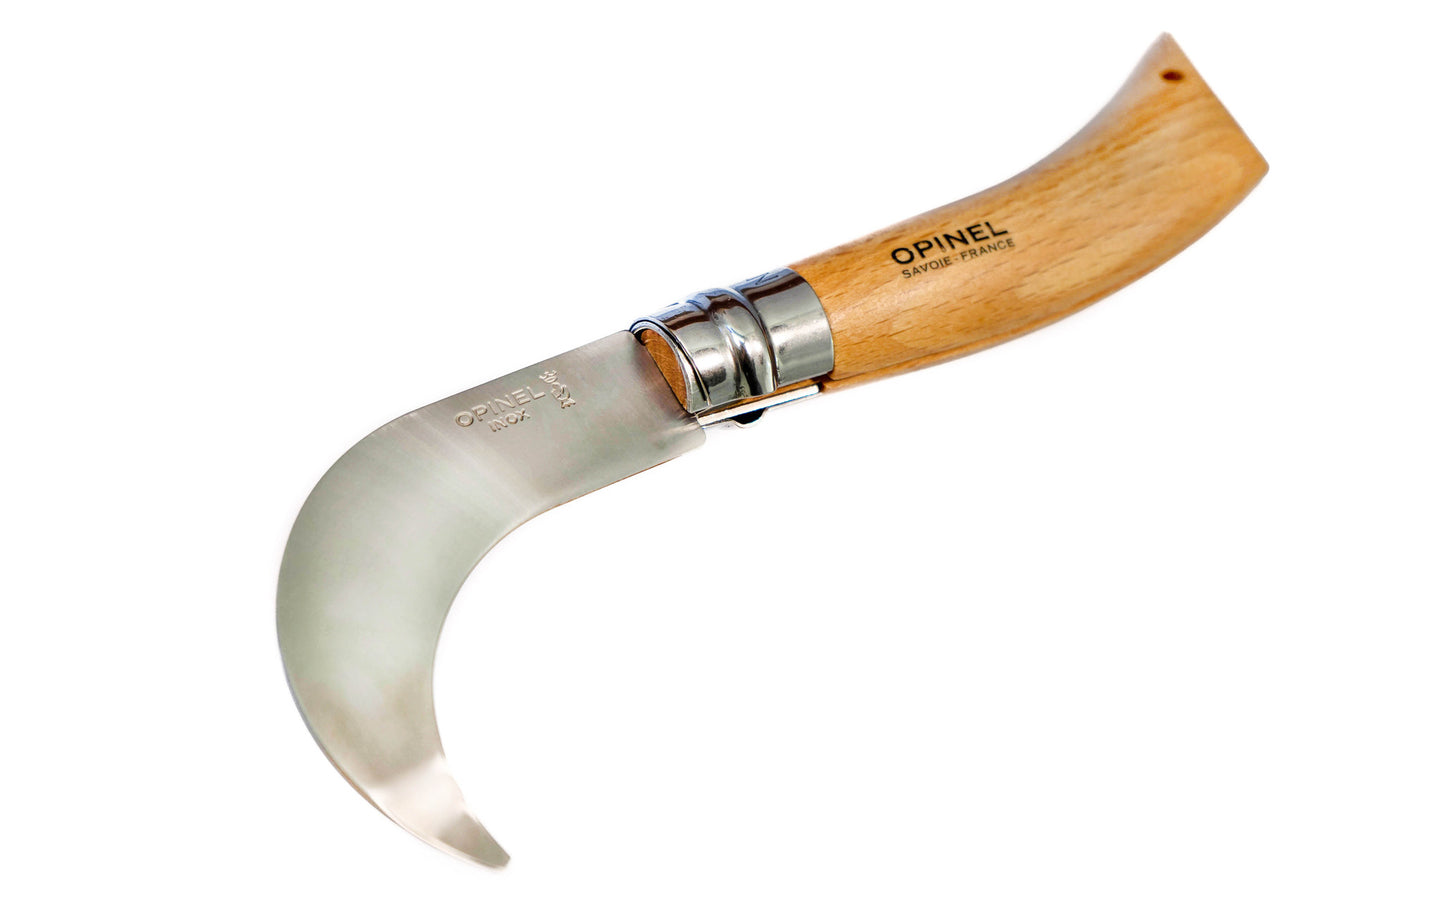 Opinel Stainless Steel No. 10 Pruning Knife ~ Made in France ~ 3-1/4" long foldable blade with stainless locking collar ~ Made of 12c27 Sandvik stainless steel ~ Beechwood handle ~ Specially curved blade